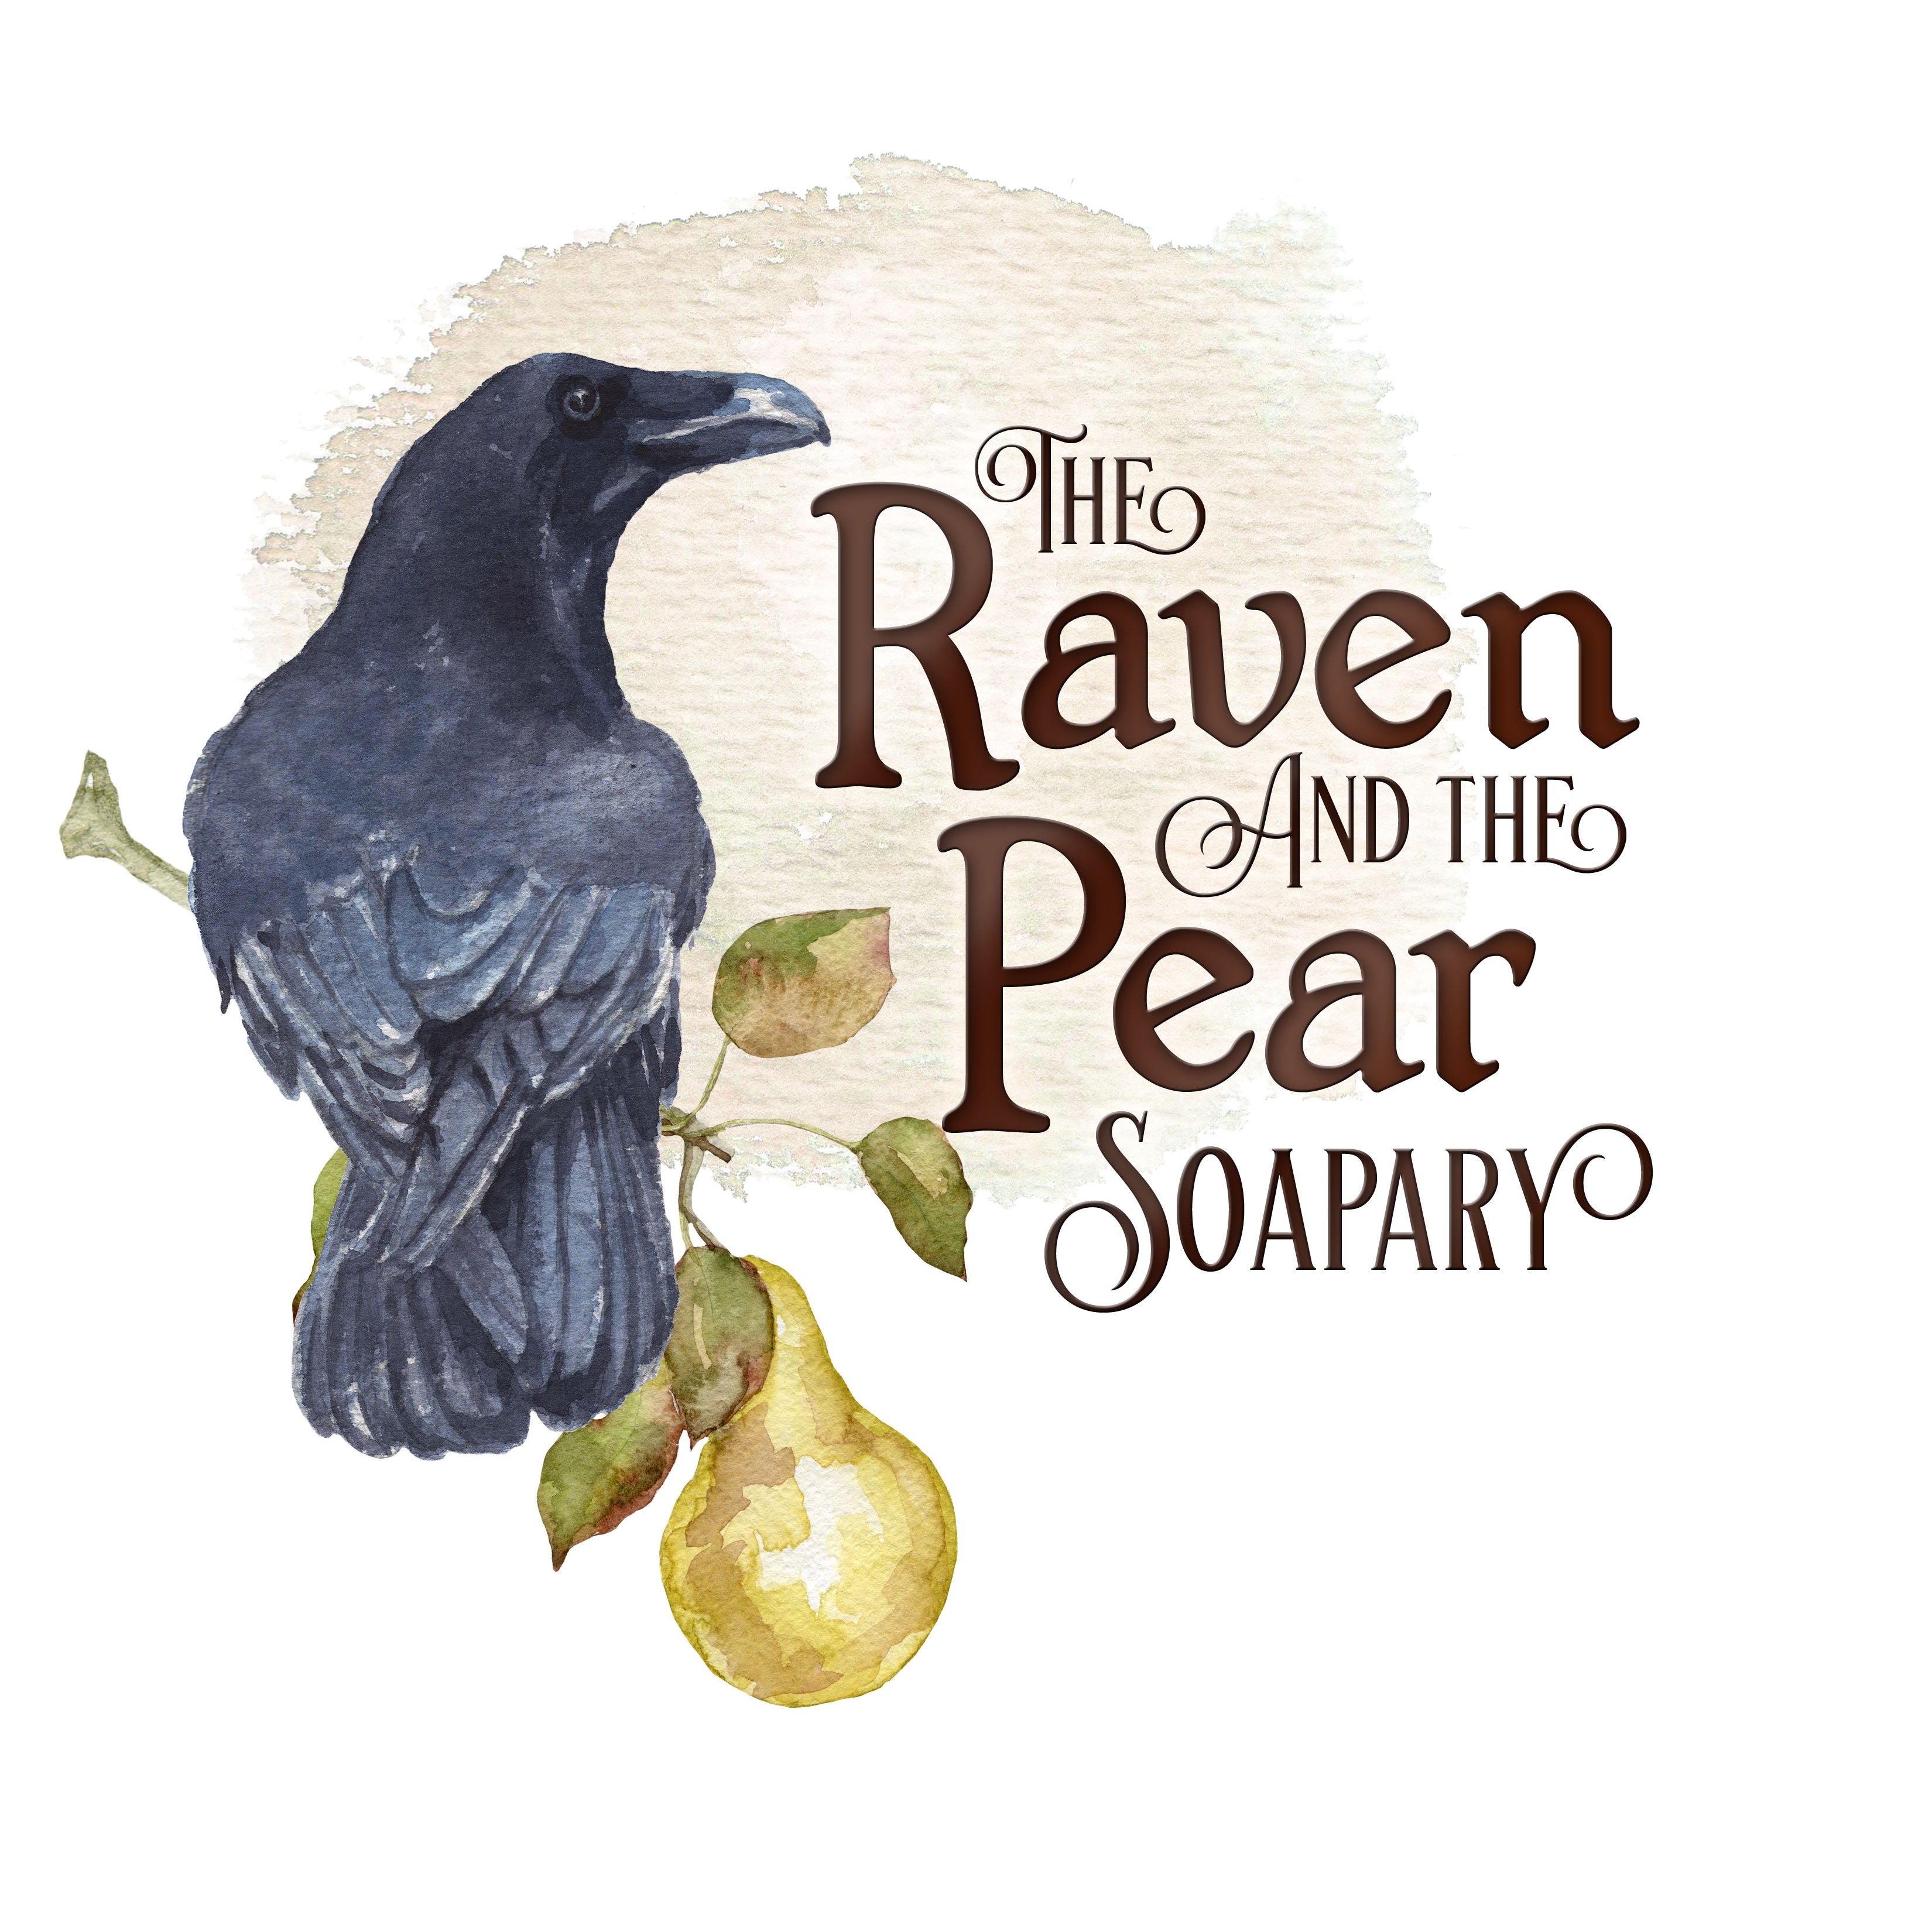 The Raven and the Pear Soapary